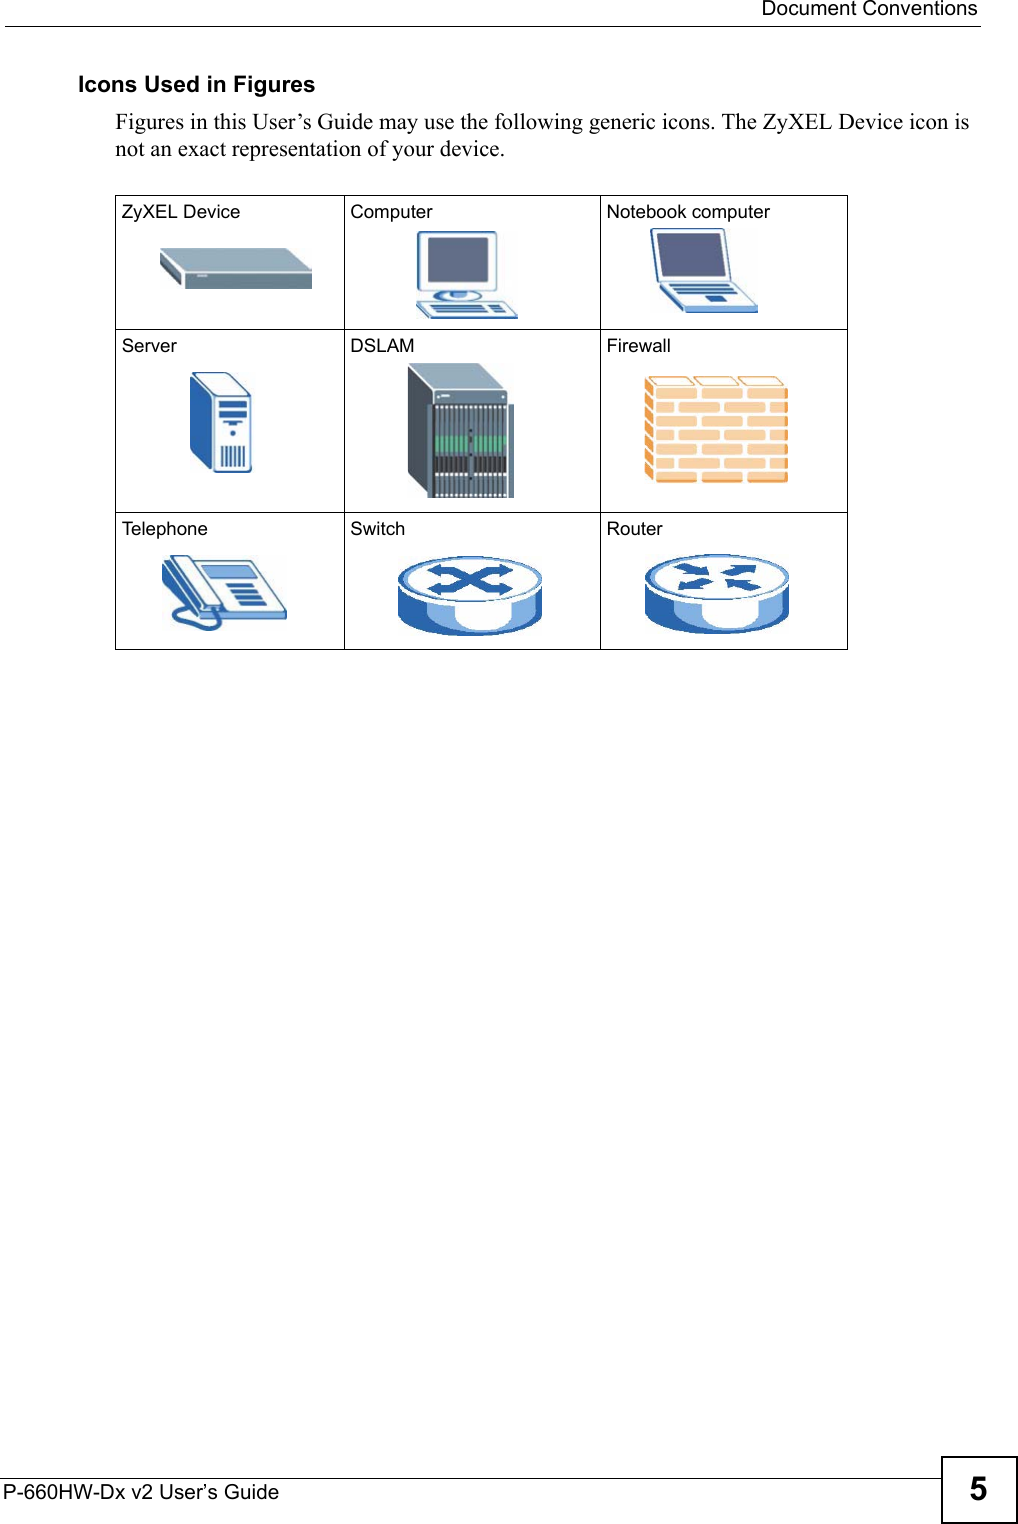  Document ConventionsP-660HW-Dx v2 User’s Guide 5Icons Used in FiguresFigures in this User’s Guide may use the following generic icons. The ZyXEL Device icon is not an exact representation of your device.ZyXEL Device Computer Notebook computerServer DSLAM FirewallTelephone Switch Router